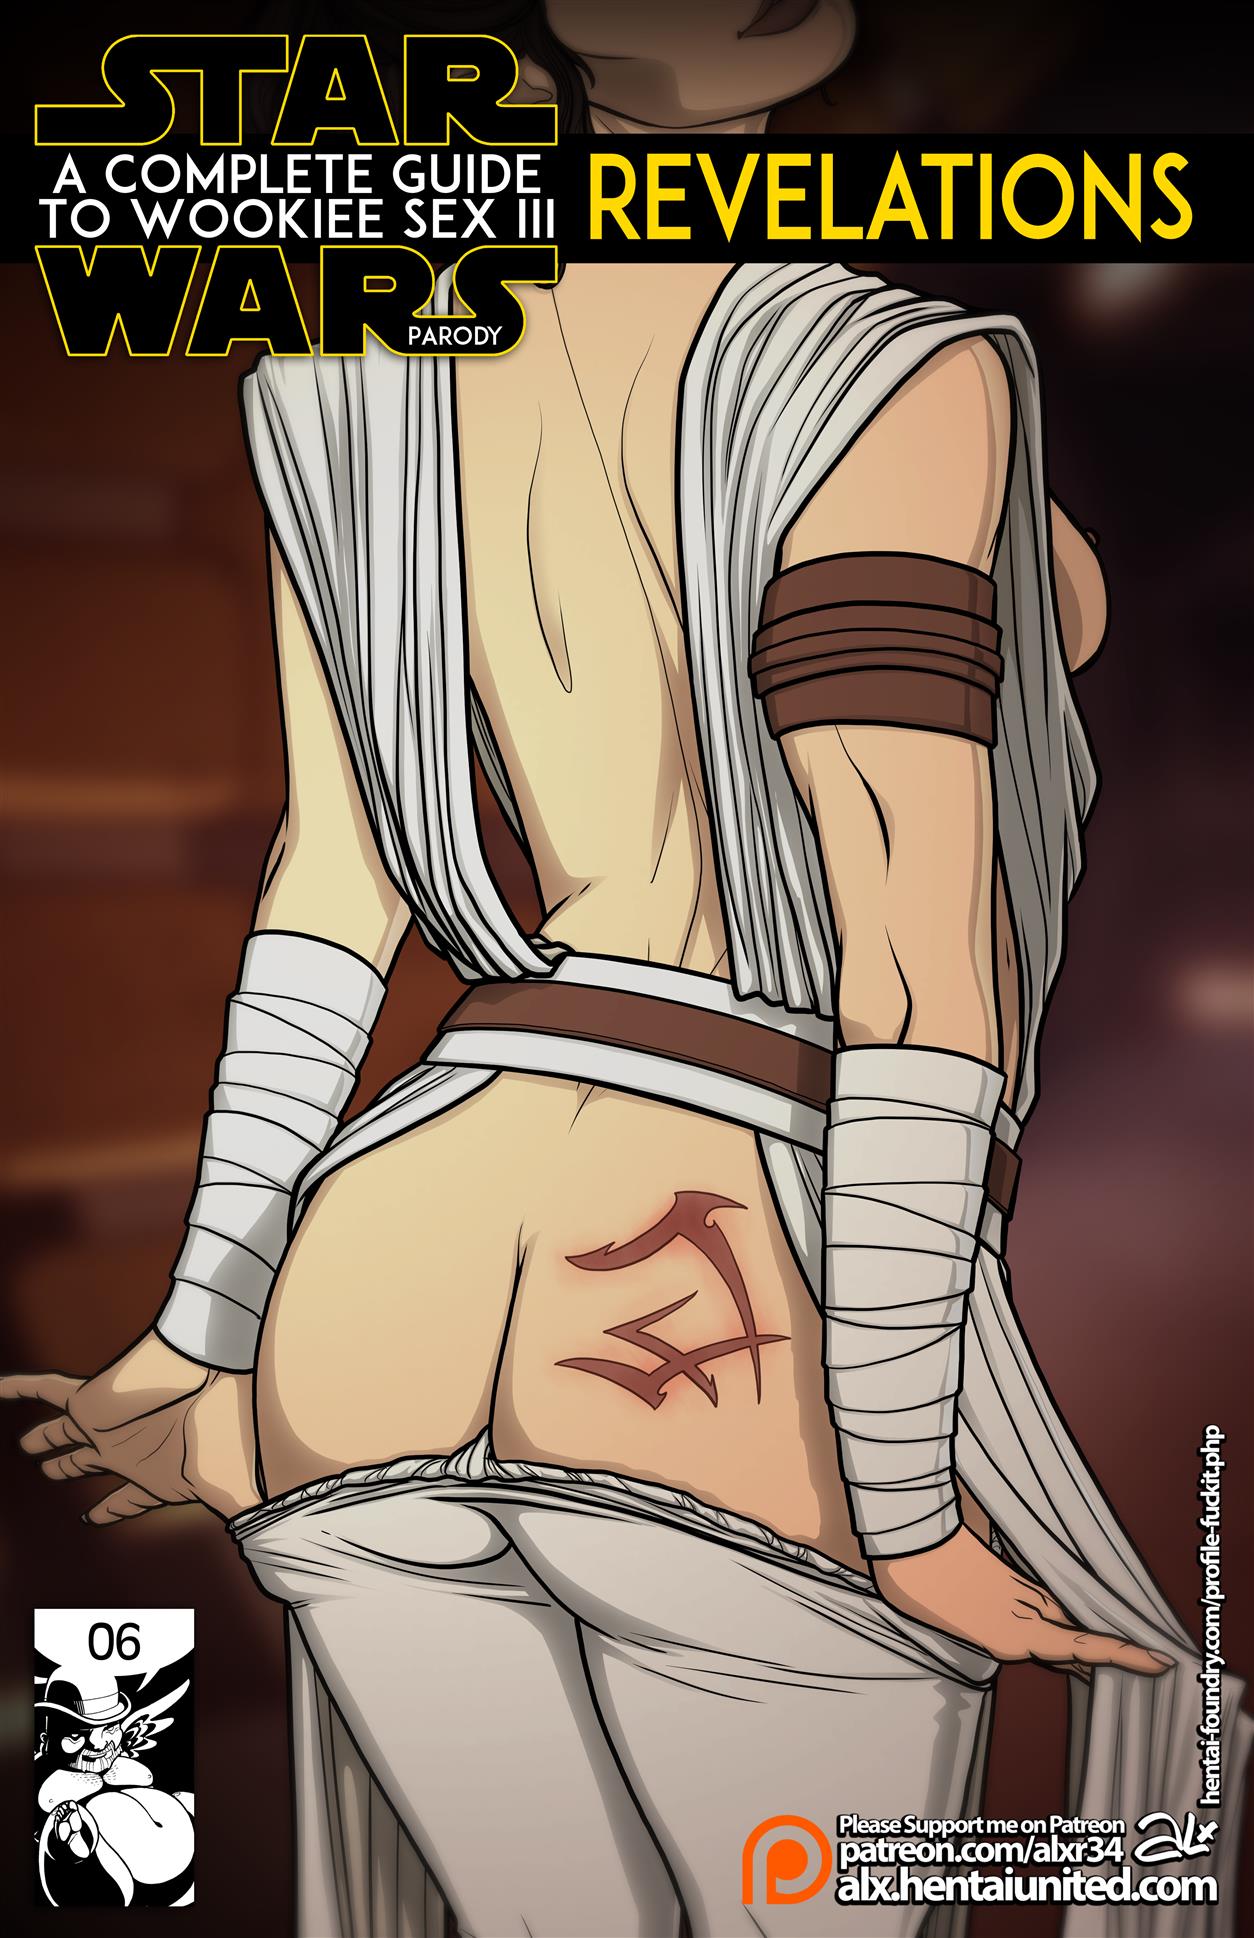 A Complete Guide to Wookie Sex III (Star Wars) [Alx]